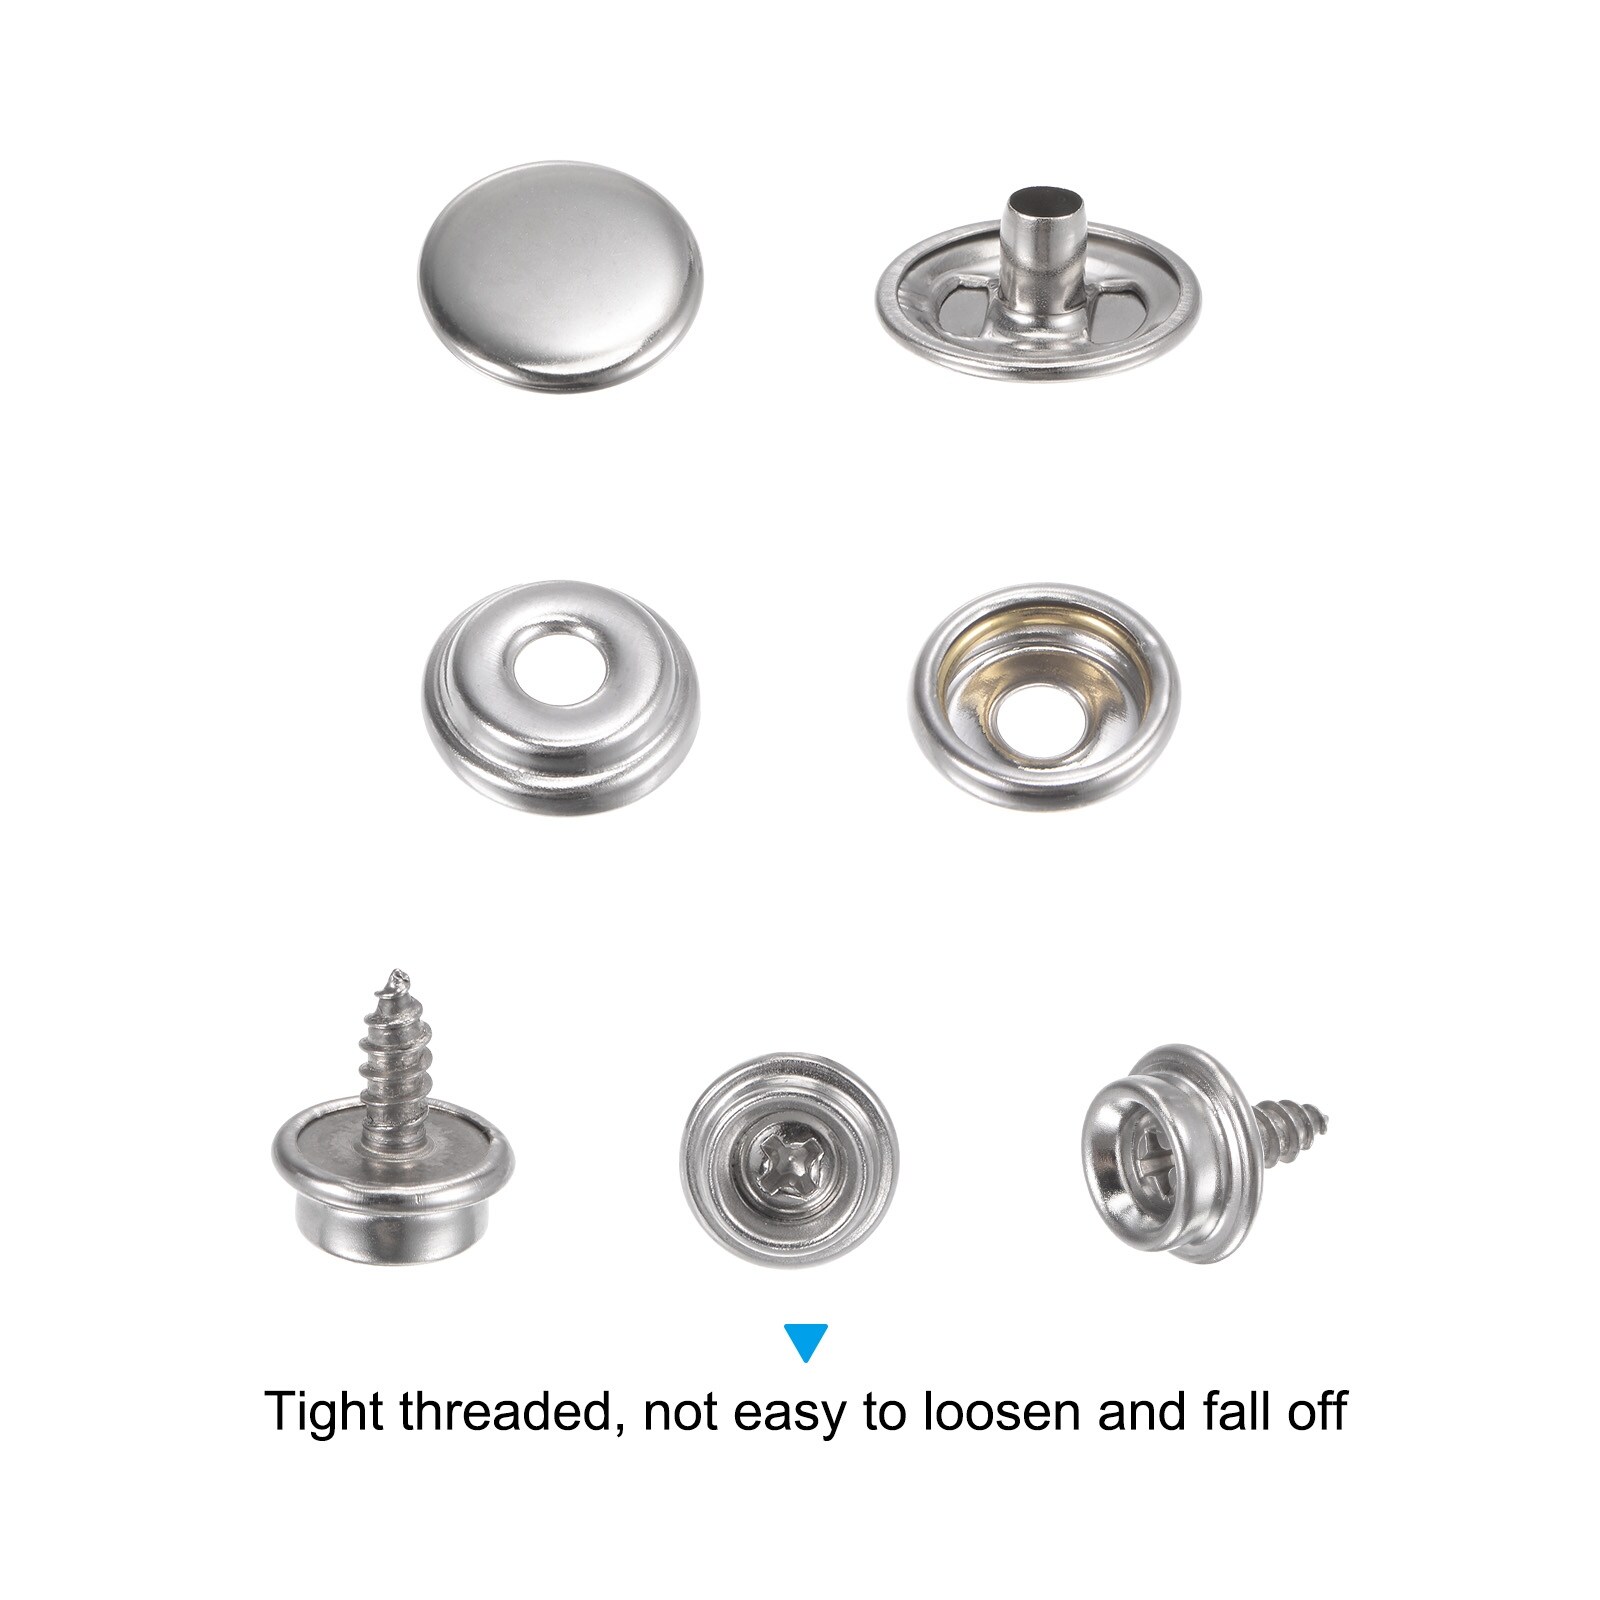 Unique Bargains 10 Sets Screw Snap Kit 10mm Stainless Steel Snaps Button with Tool, Silver Tone - Silver Tone